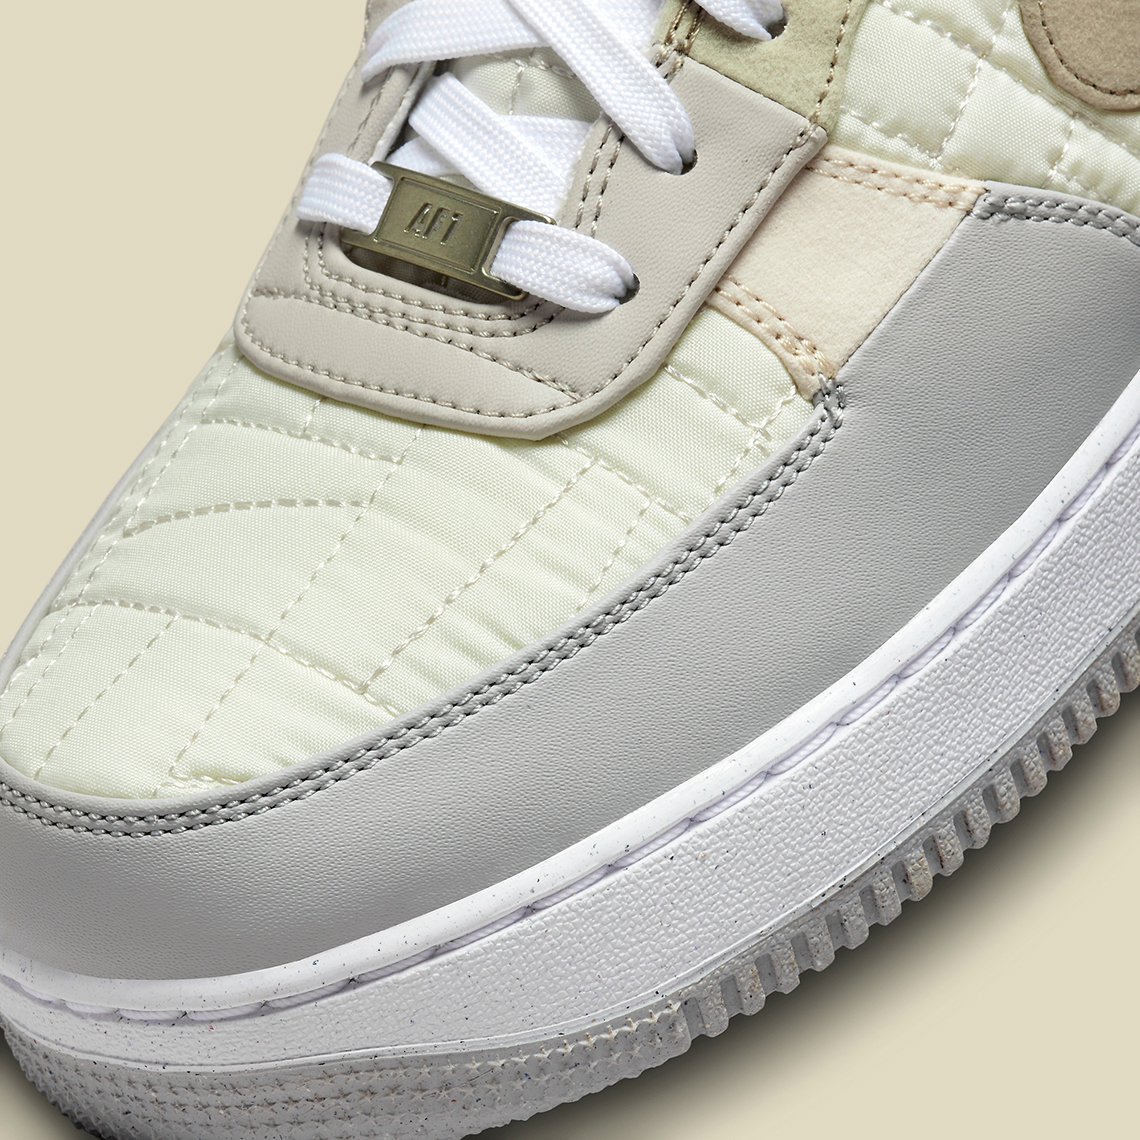 nike air force 1 low next nature toasty DX4544 072 2